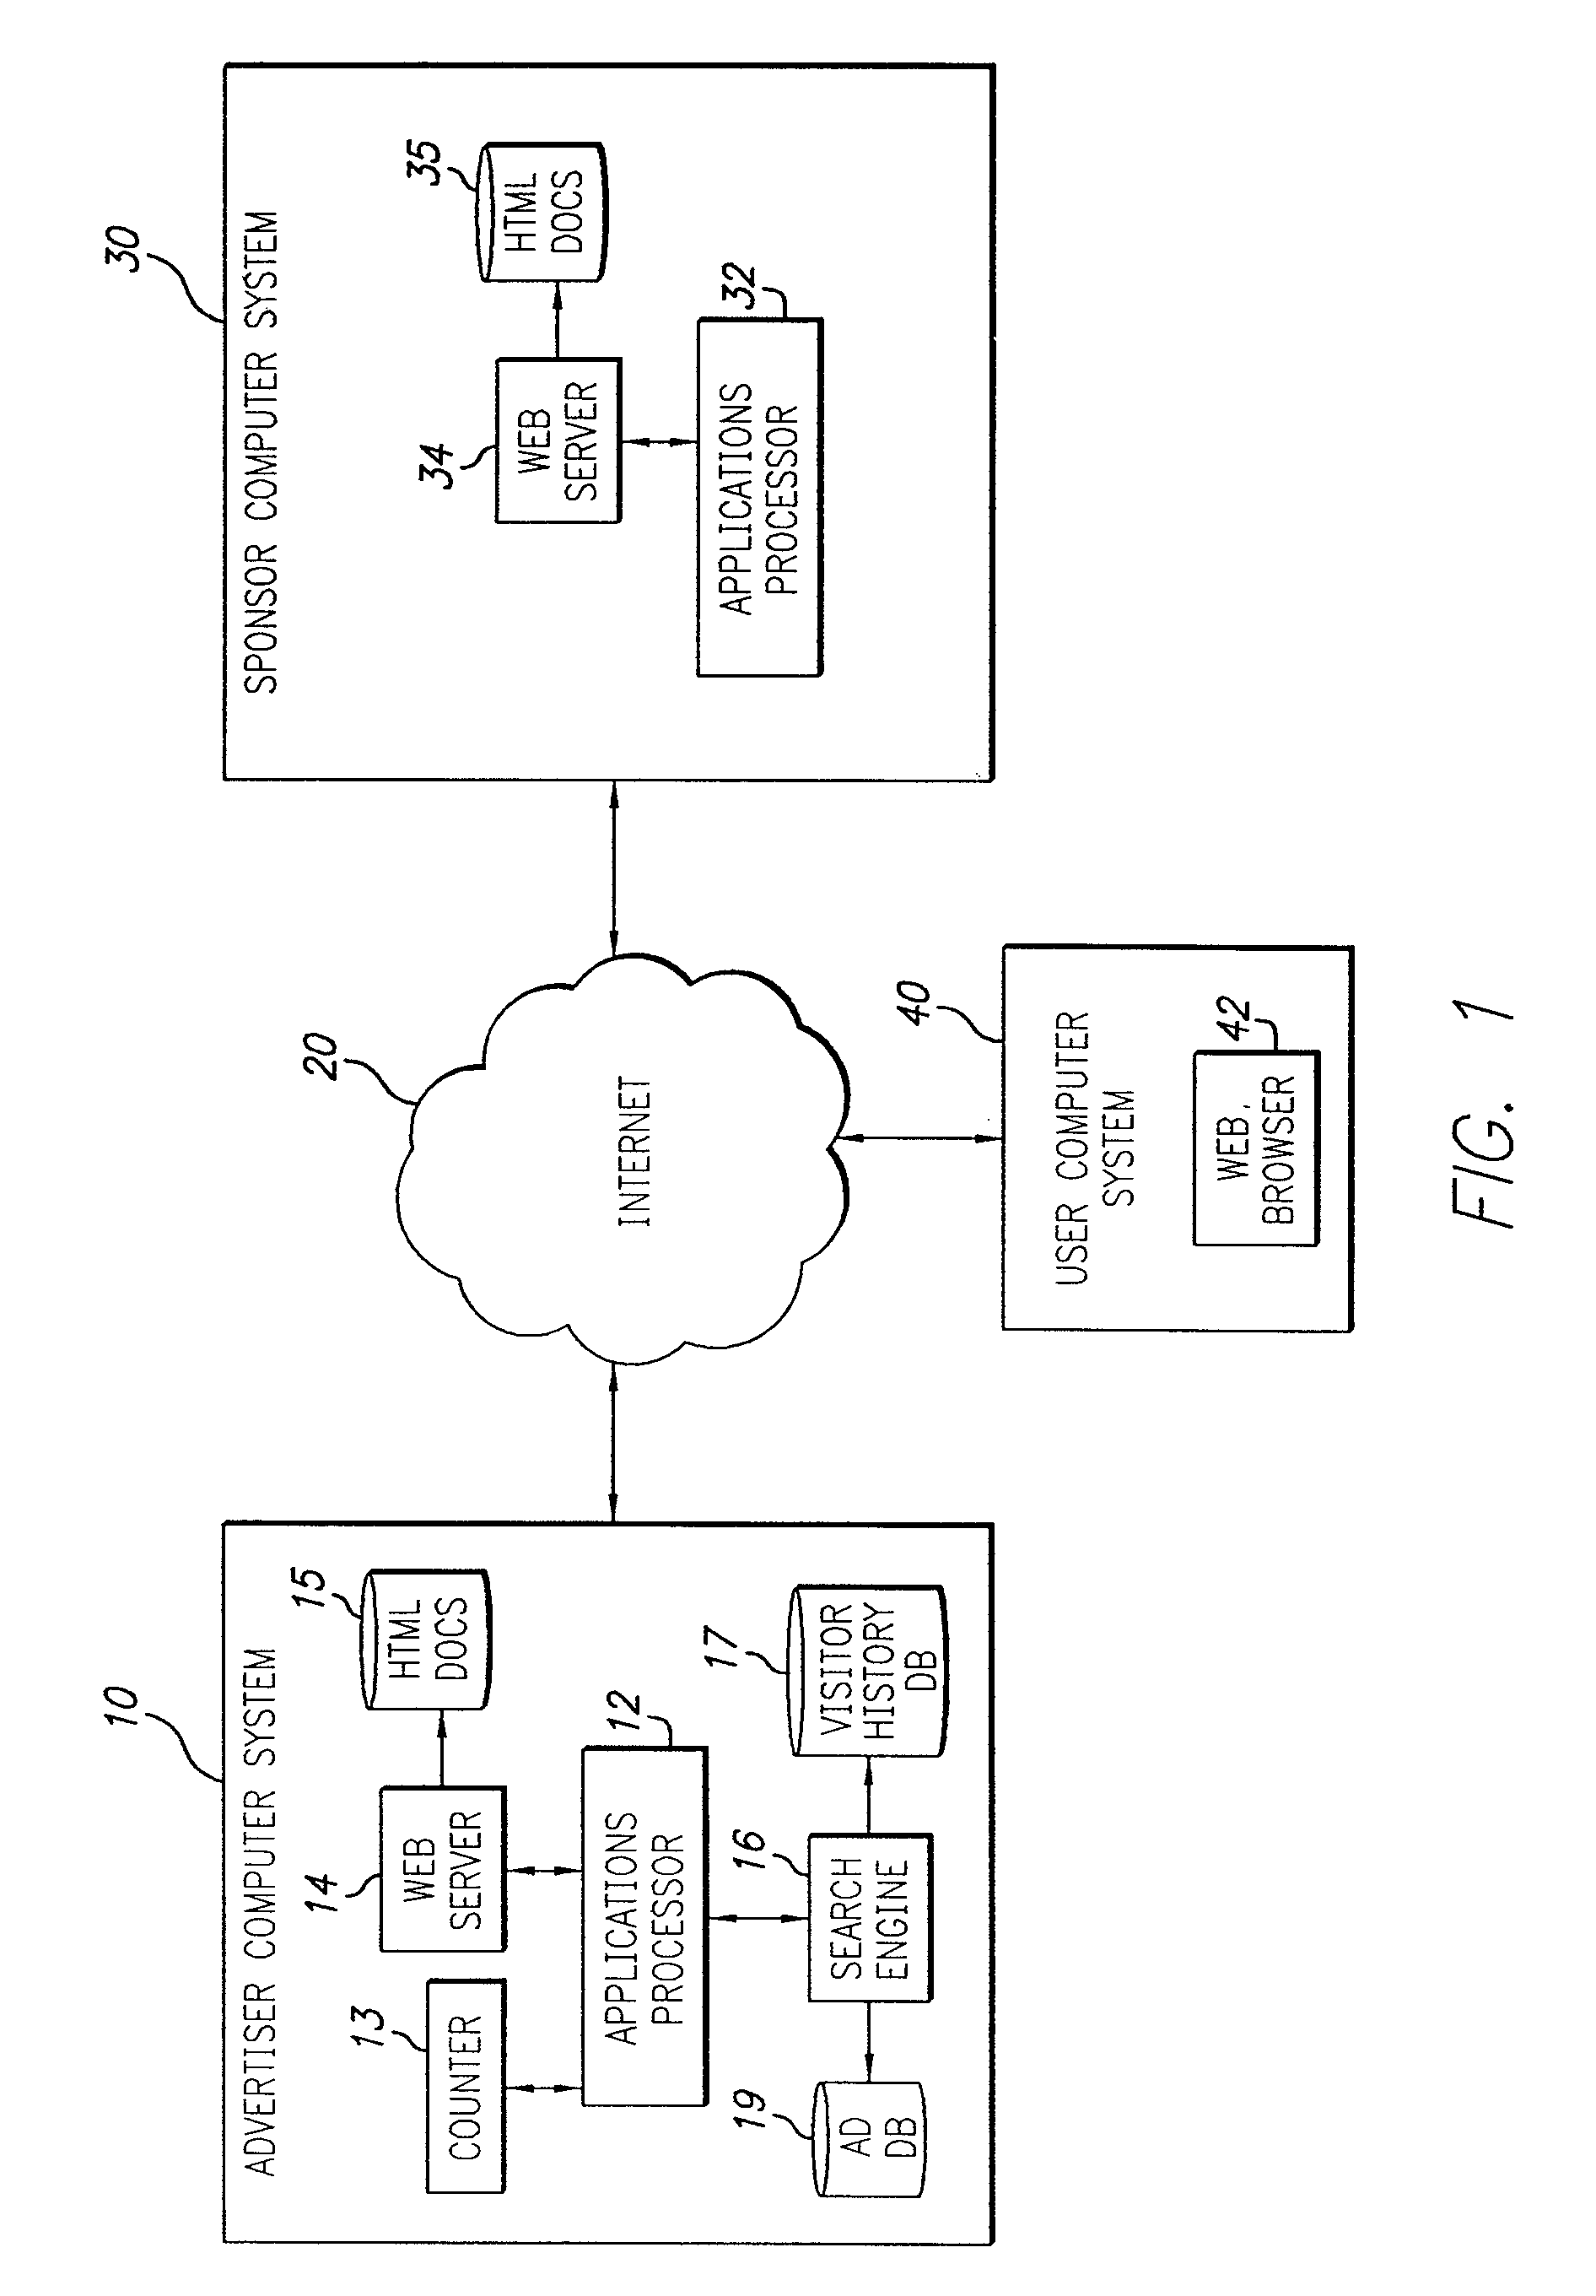 Method and apparatus for providing audio advertisements in a computer network